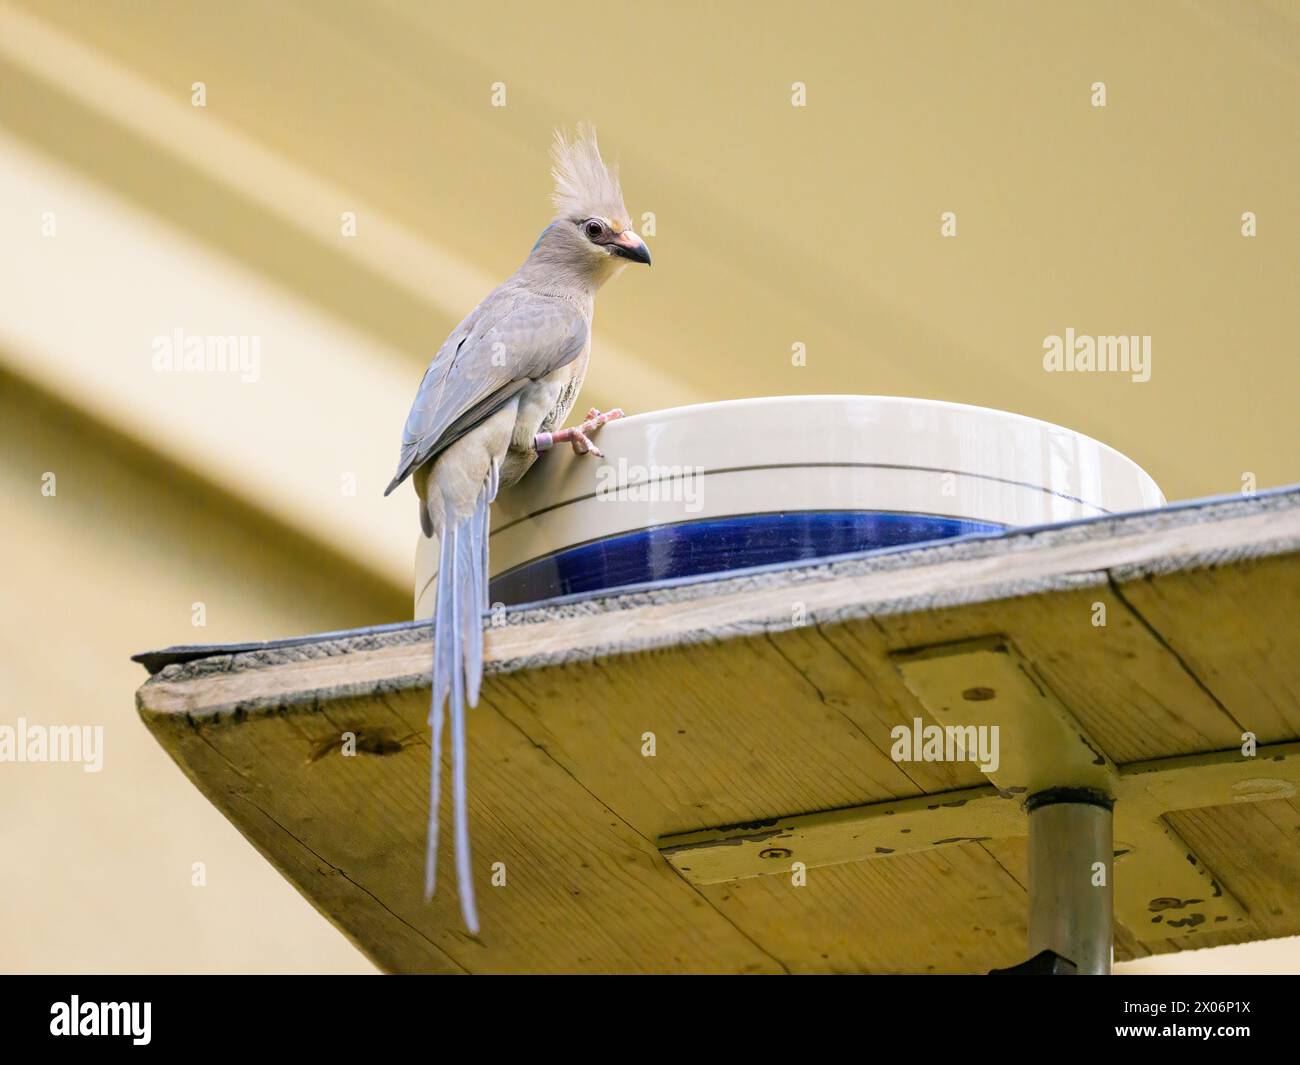 A blue naped Mousebird sitting on a bowl in a zoo Stock Photo